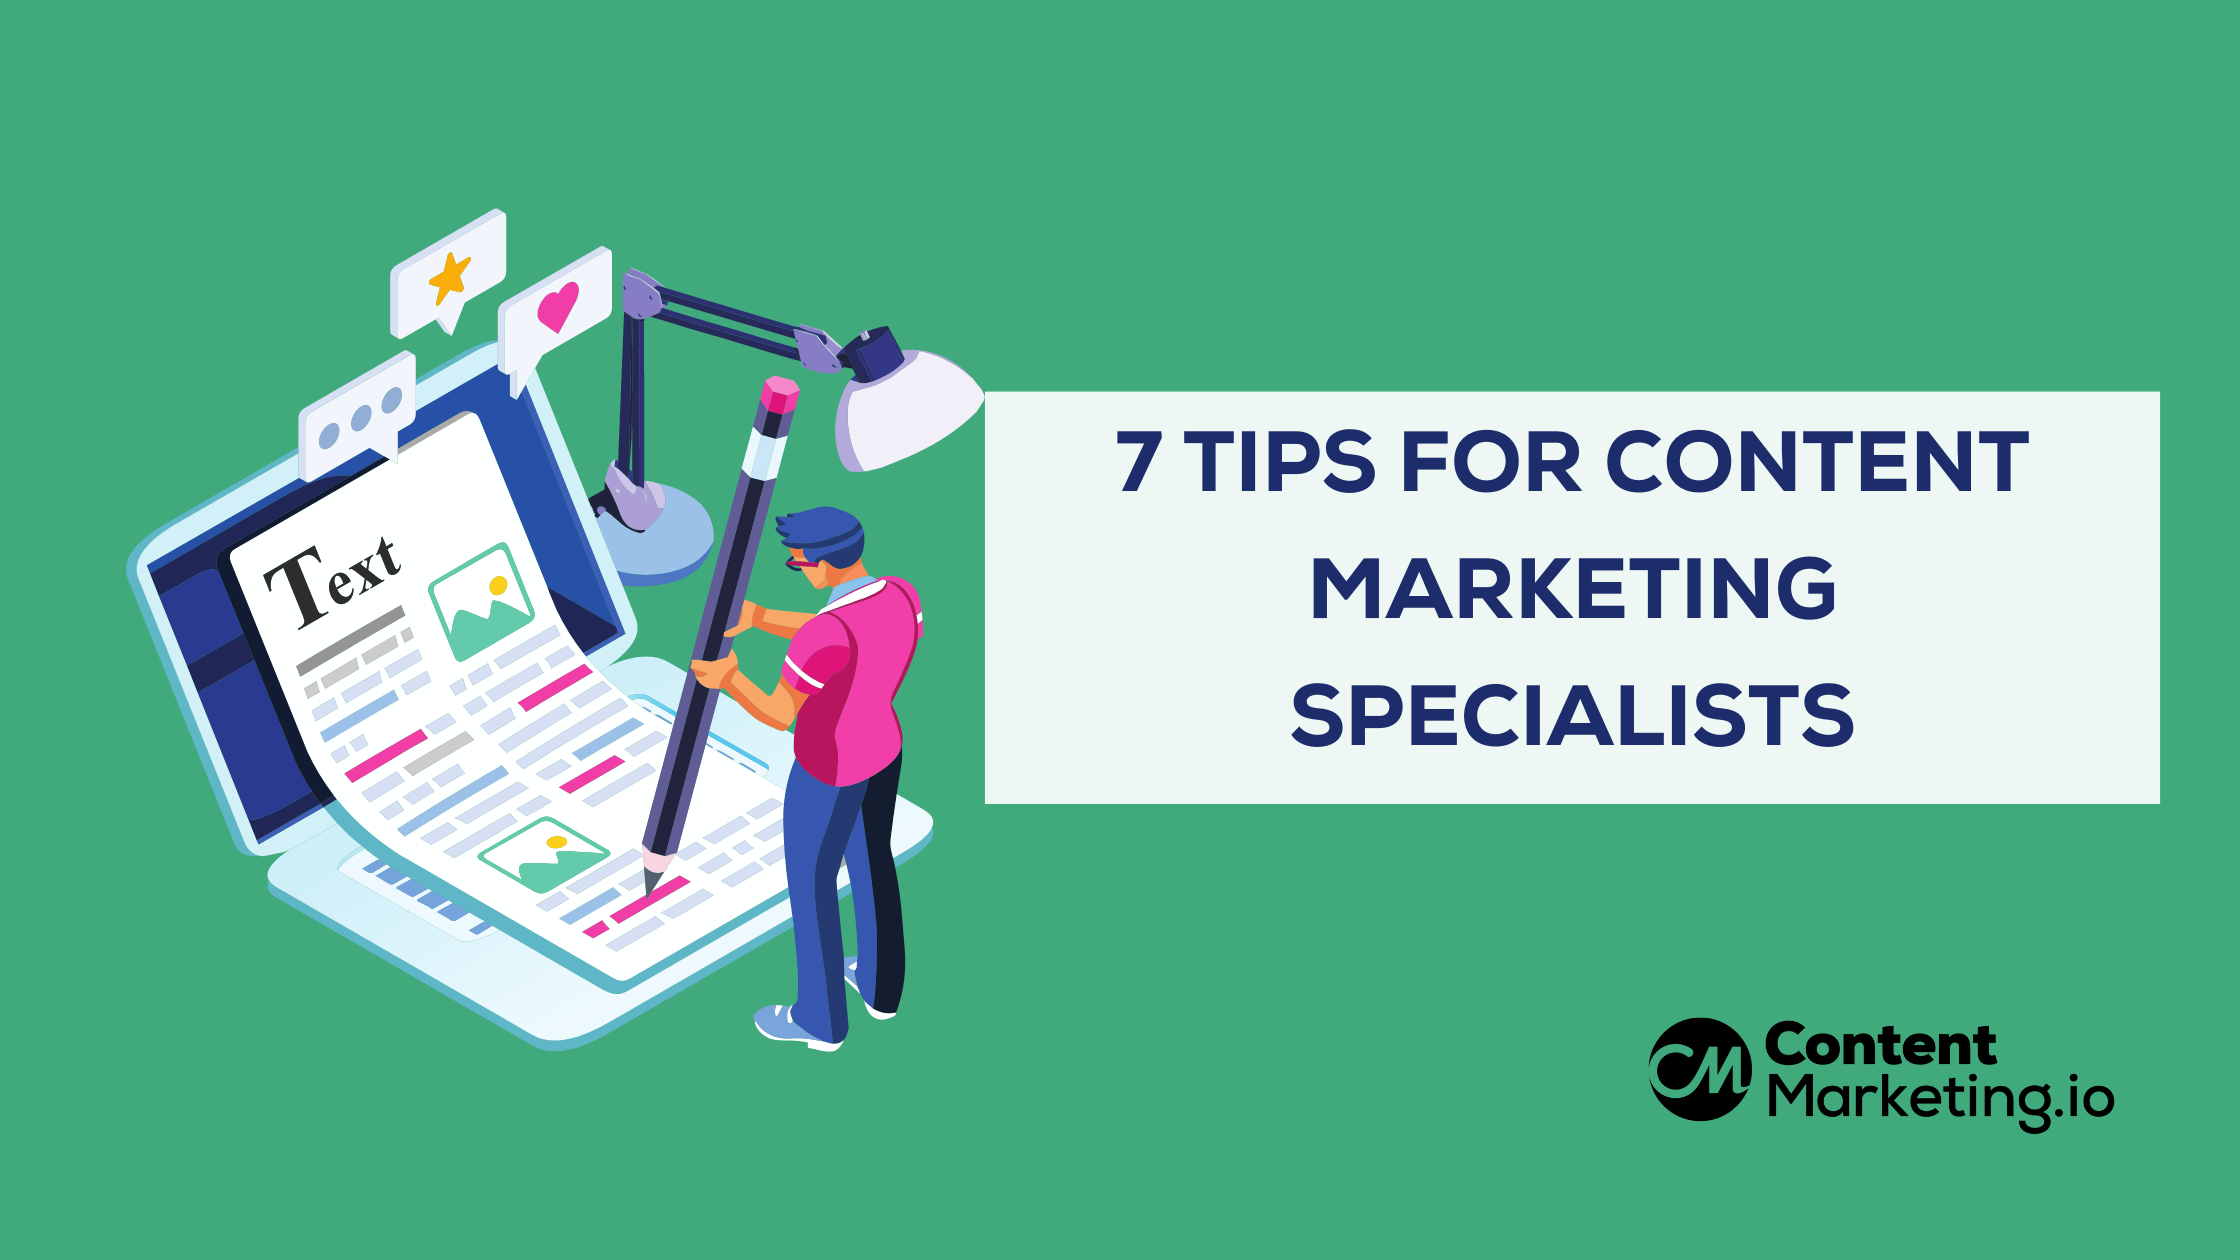 7 Tips for Content Marketing Specialists